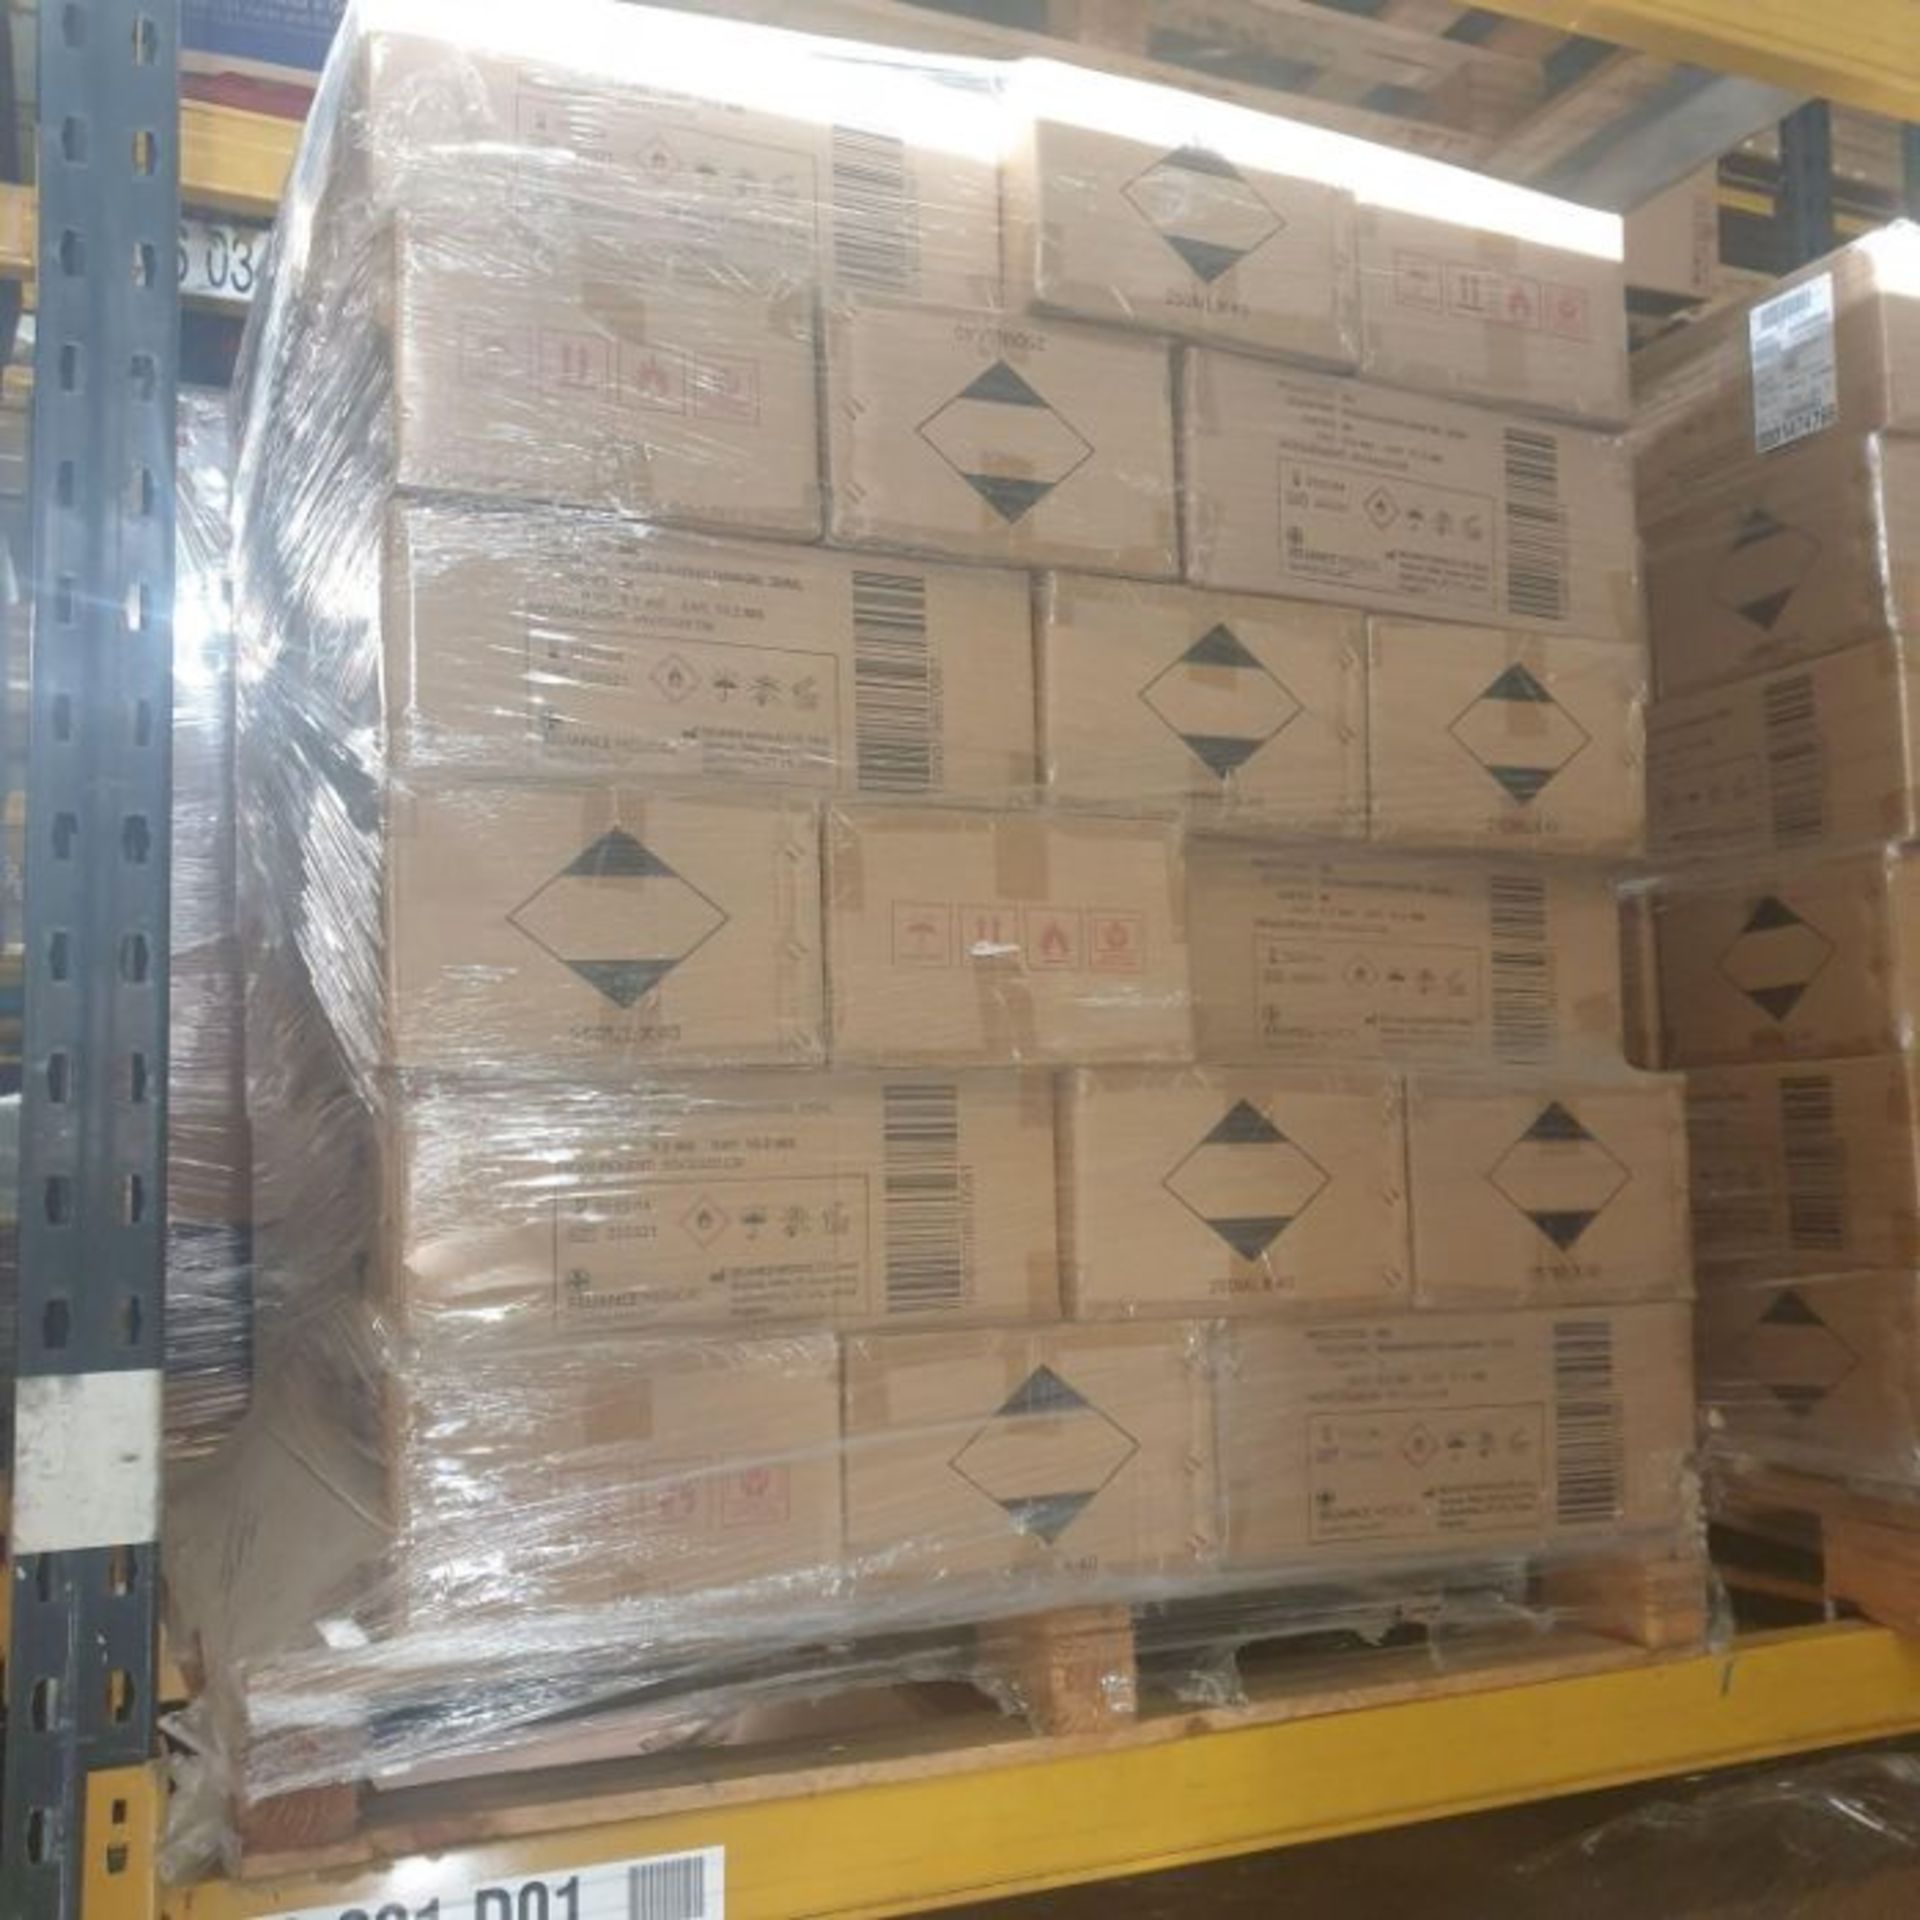 1 BULK PALLET TO CONTAIN 36 BOXES OF RELISAN 70% ALCOHOL HAND GEL, 500ML BOTTLES, 20 BOTTLES PER